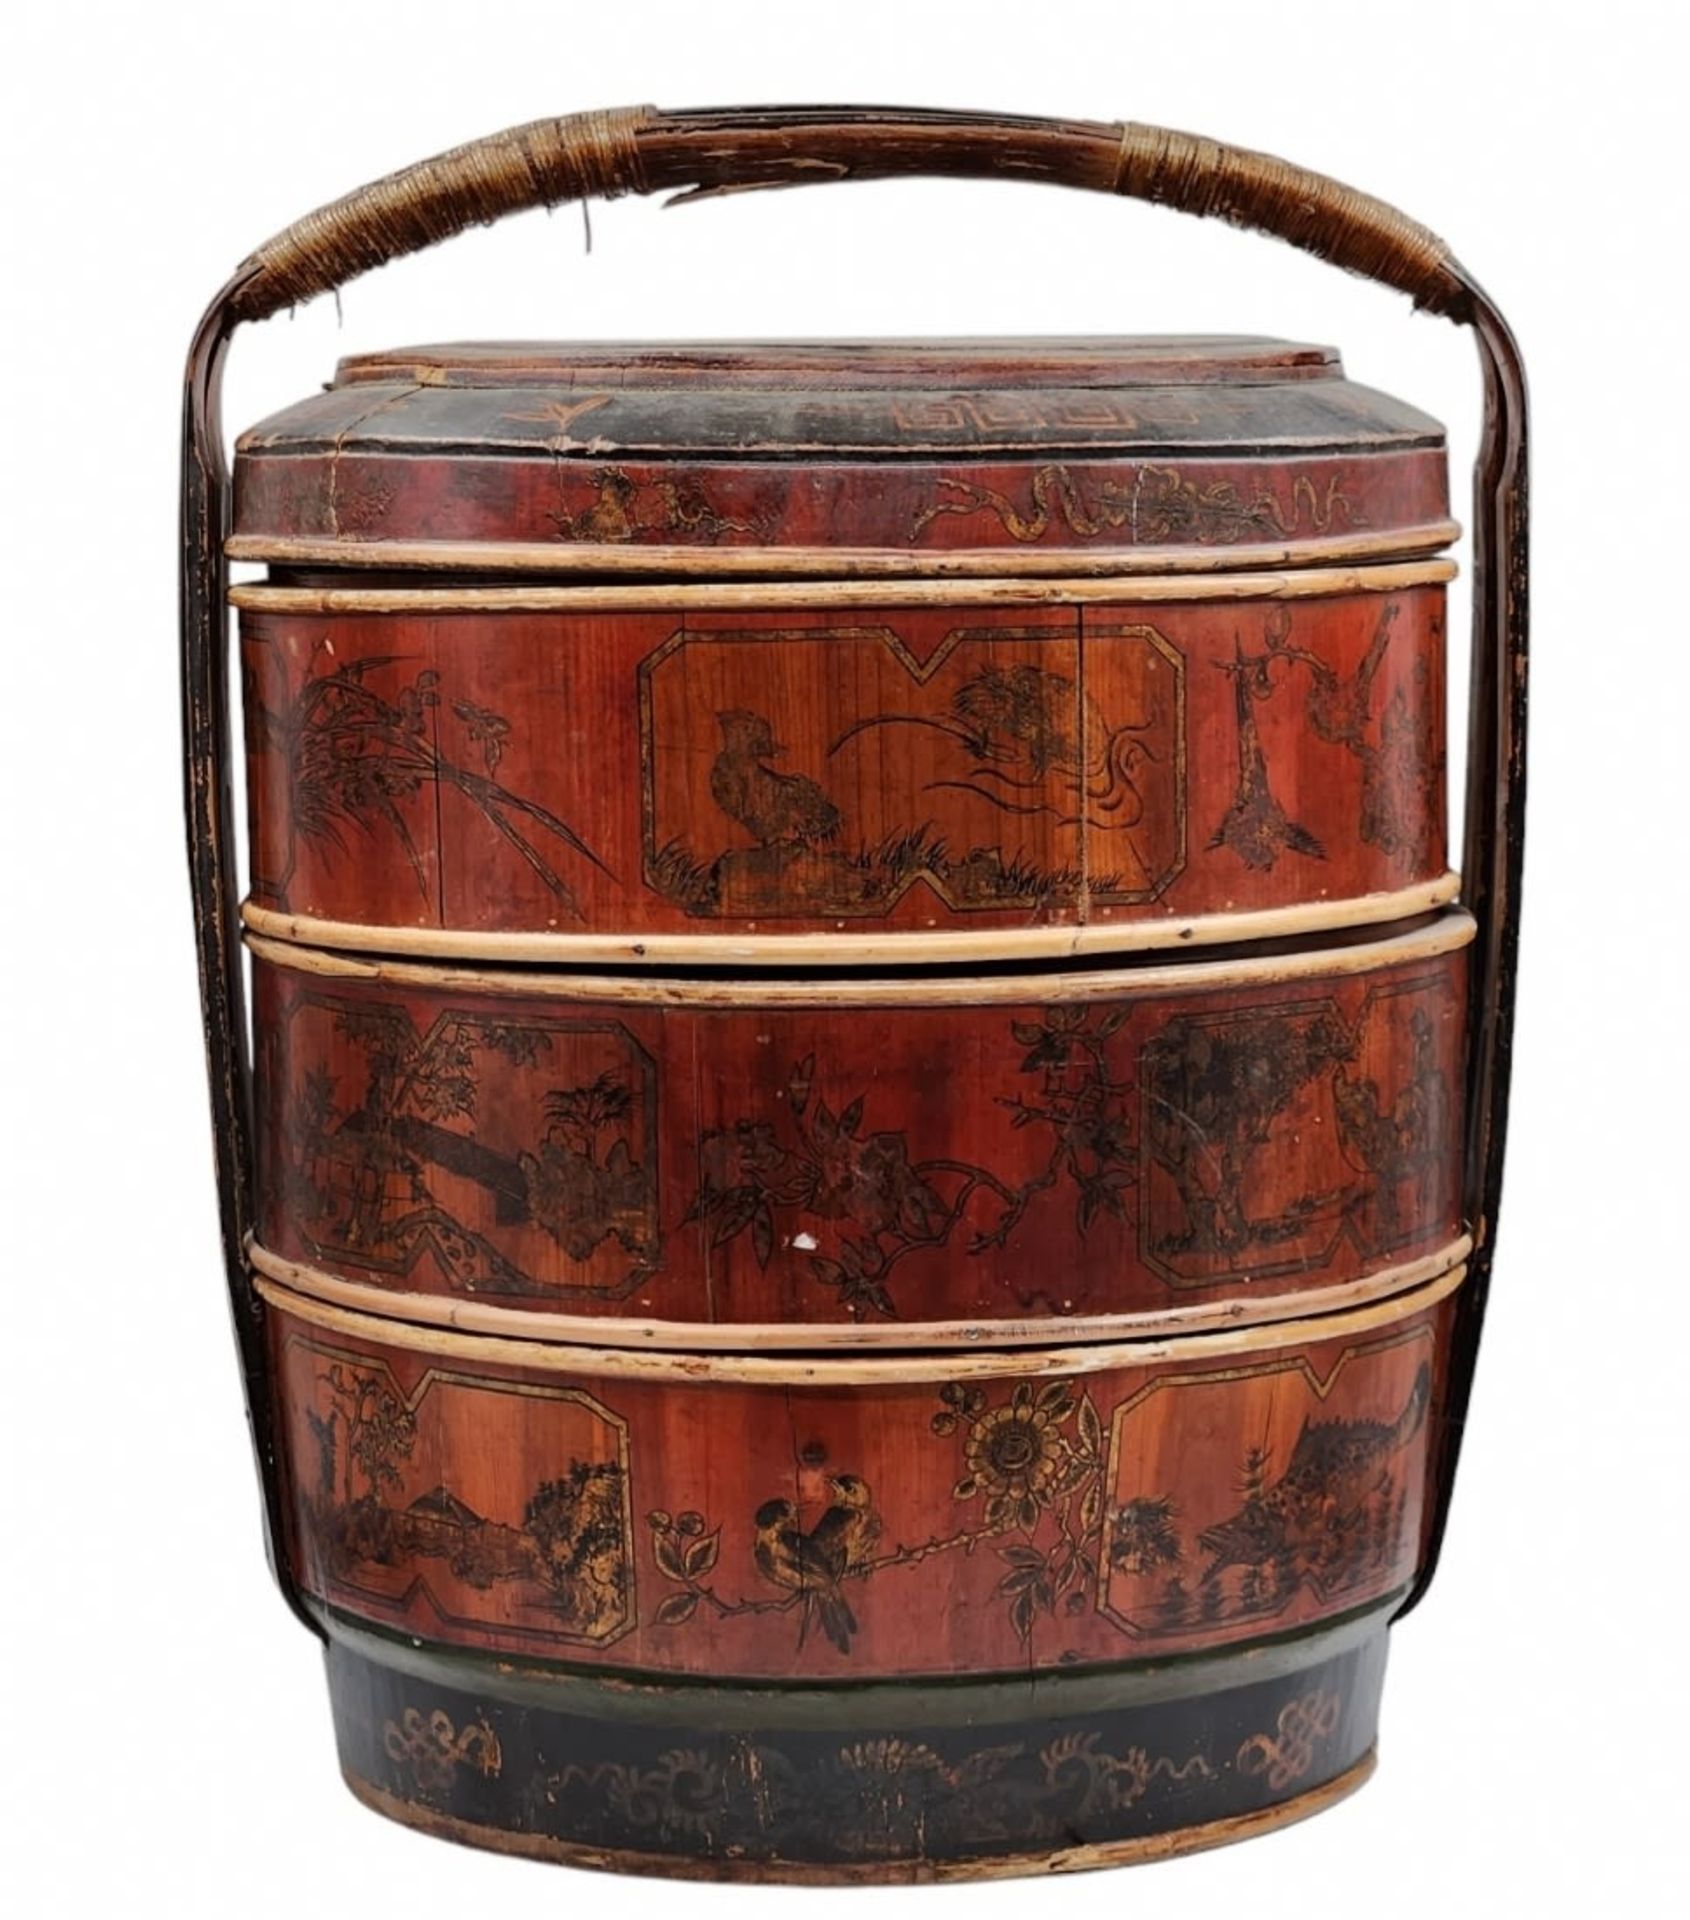 Chinese marriage basket for dowry, made of wood and straw, hand painted on a lacquer background,